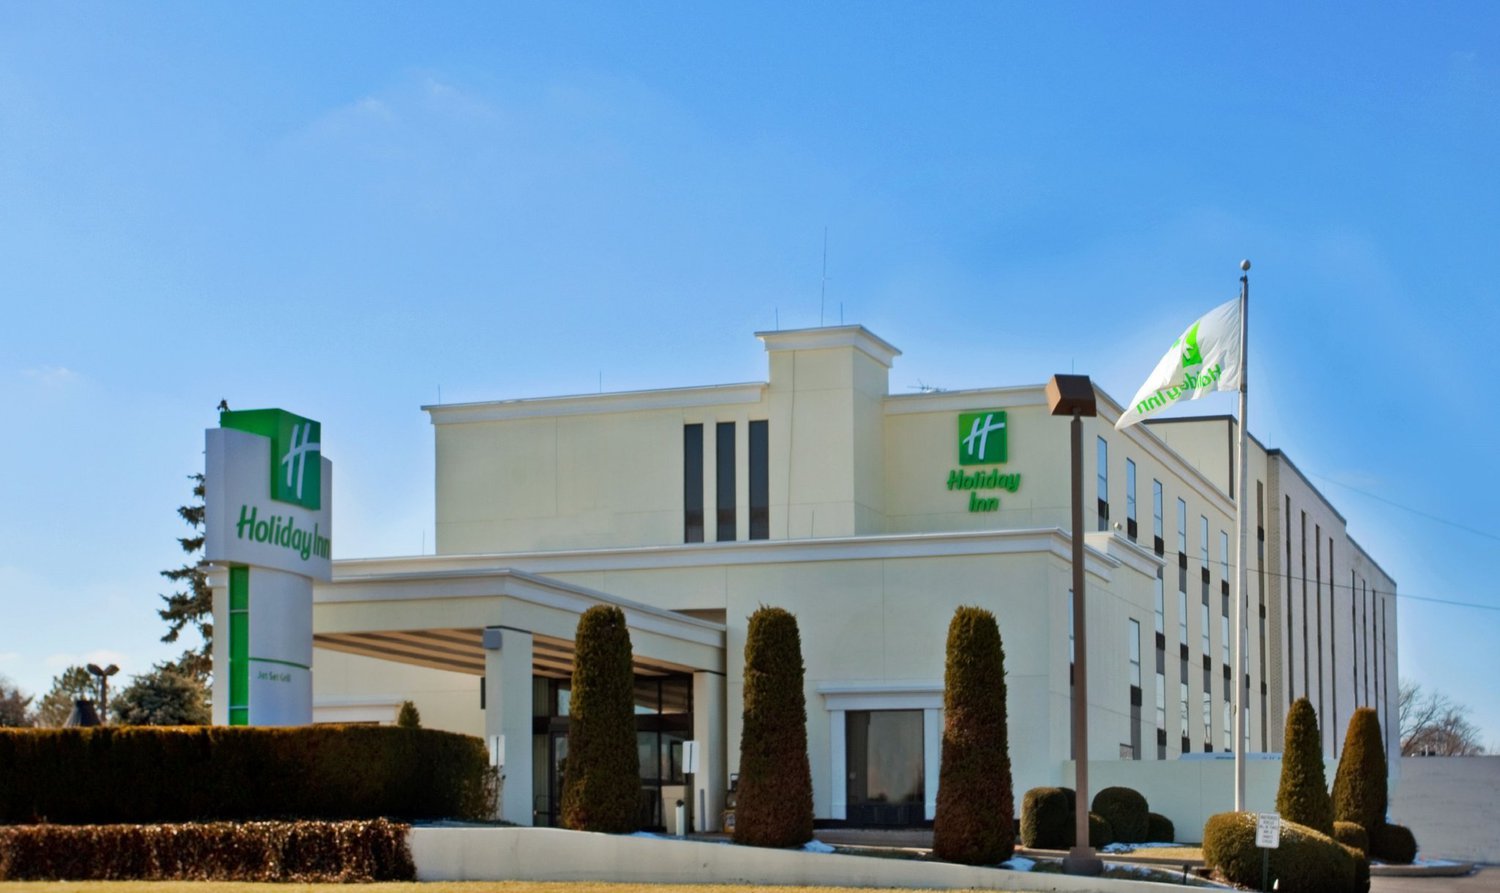 Holiday Inn St. Louis-Airport, St. Louis, MO Jobs | Hospitality Online